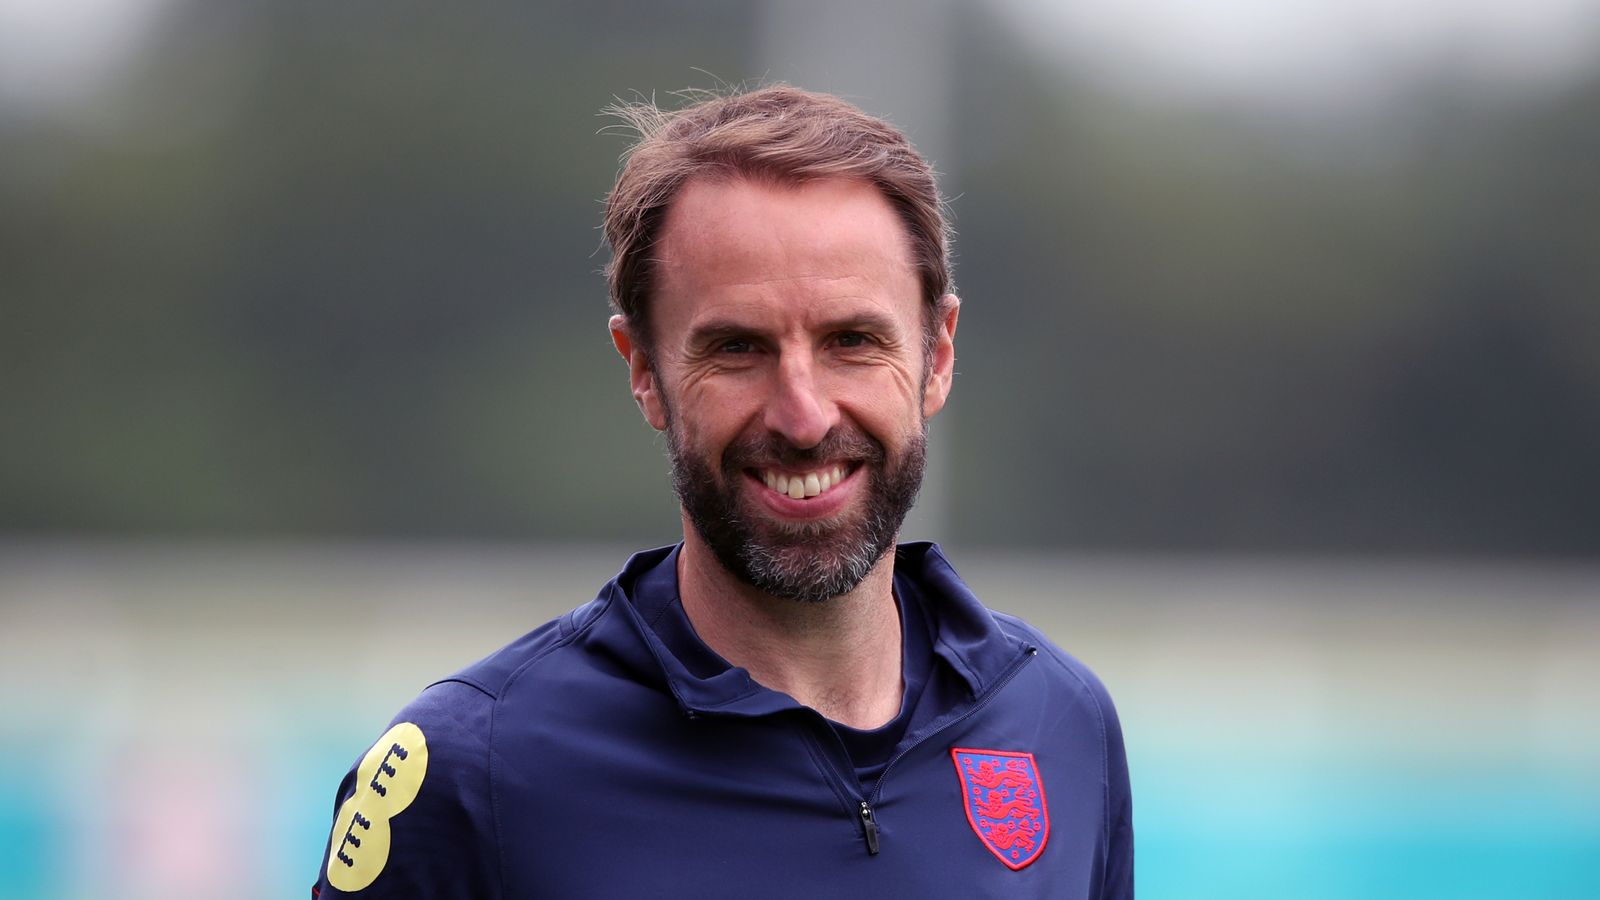 Photo of Gareth Southgate: Trainer Amy Murphy hopes to name the racehorse in honor of England manager after Euro 2020 | Motorsport News